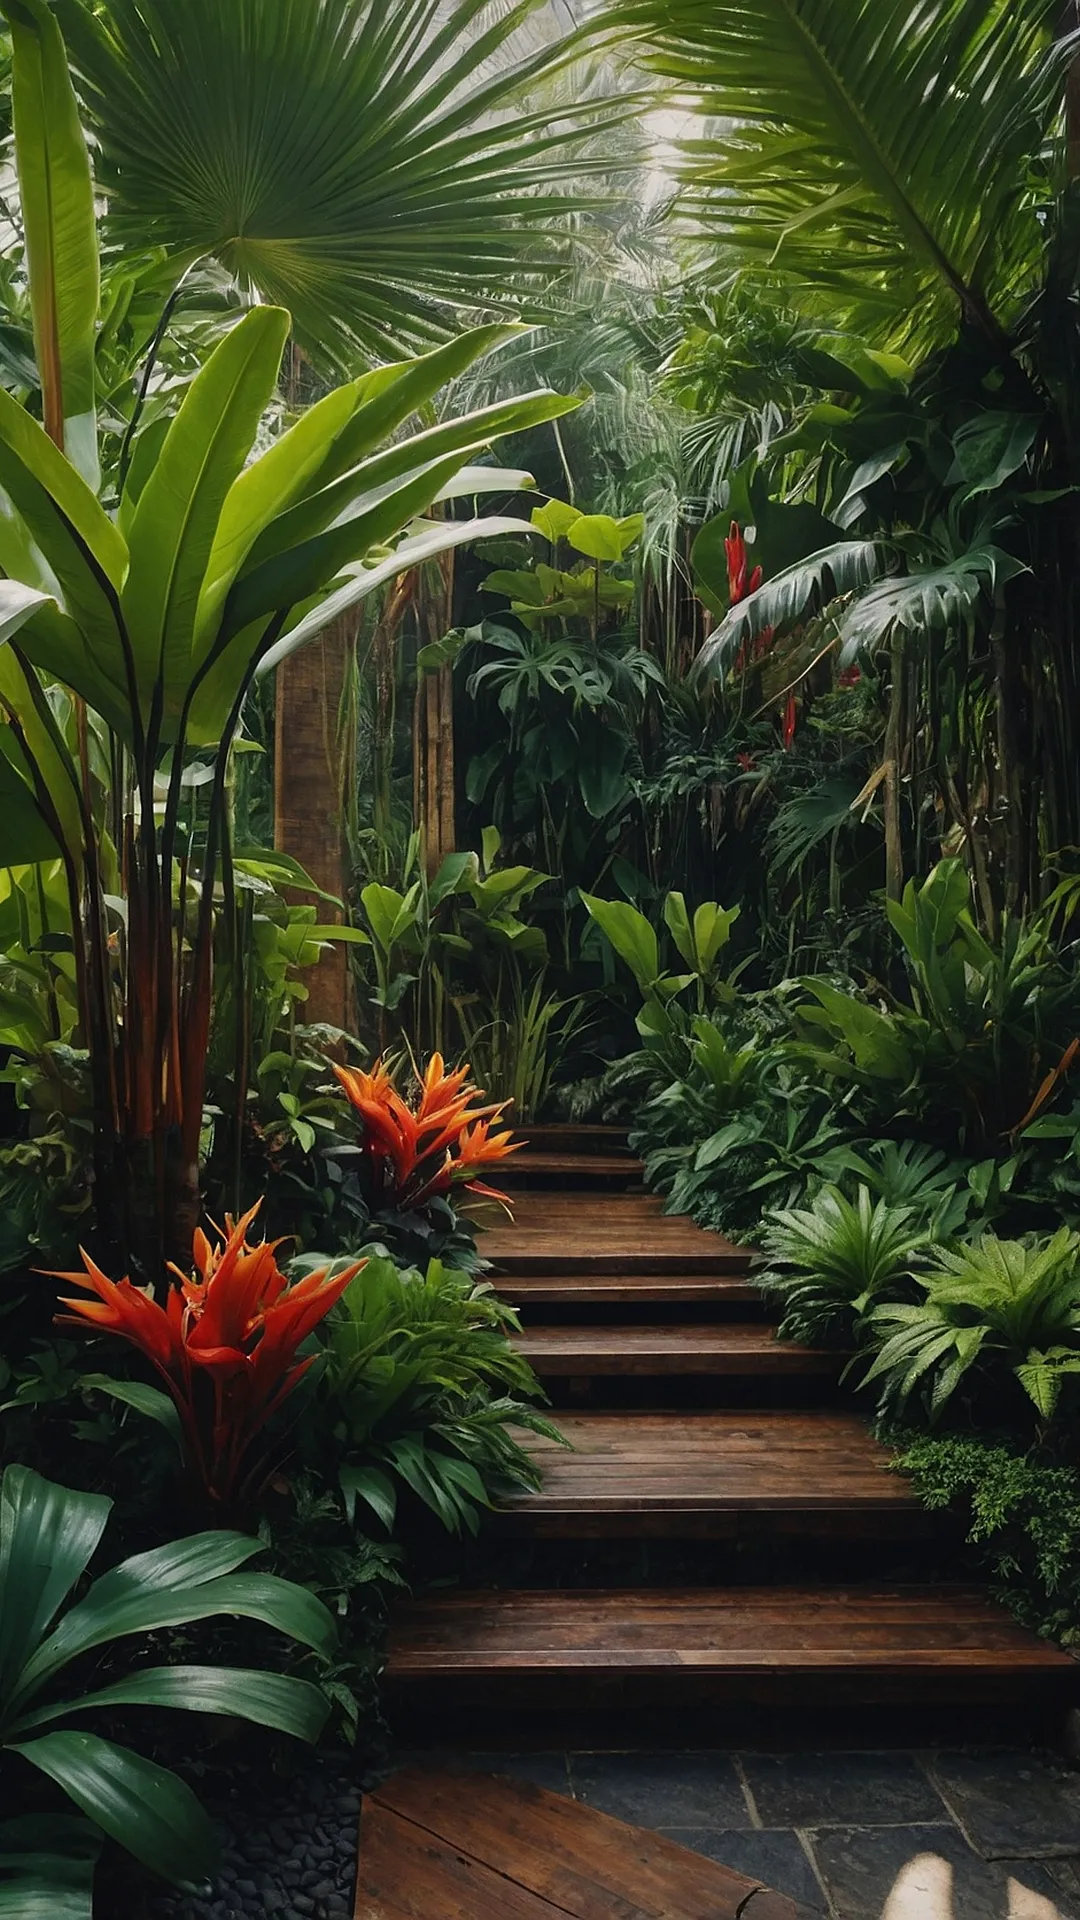 Tropical Beauty at the Entryway